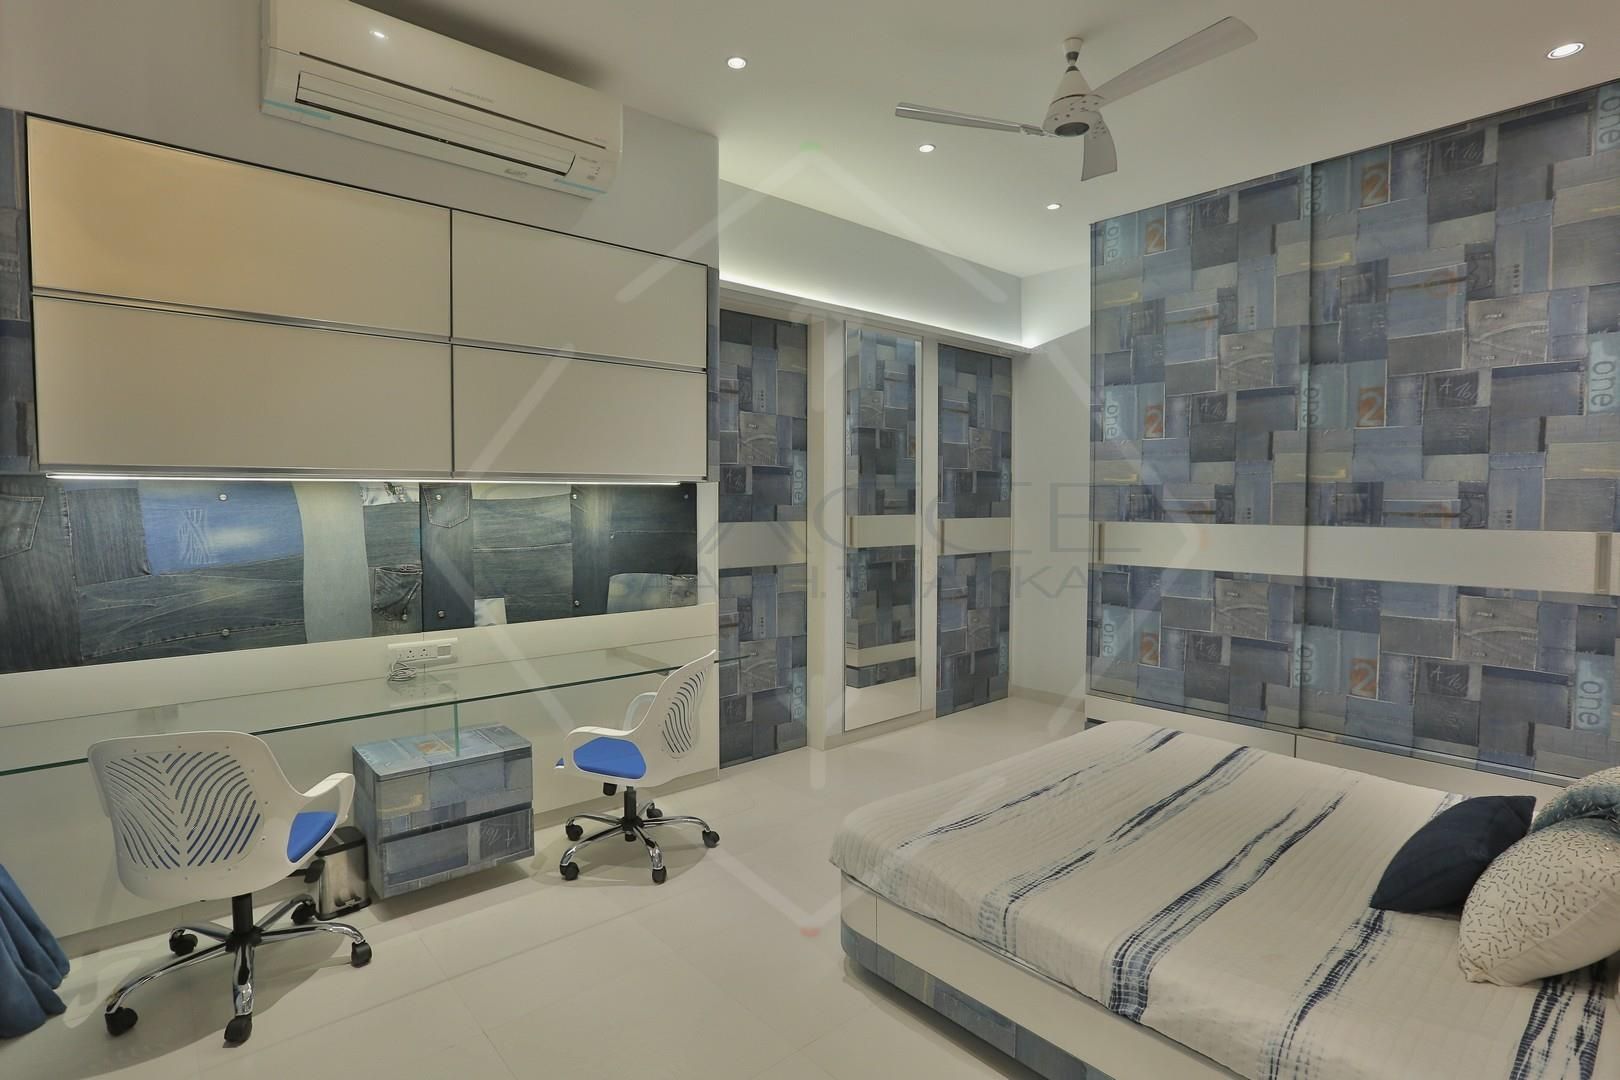 'out of the 'blue' '...an expression in modern interiors, SPACCE INTERIORS SPACCE INTERIORS Modern style bedroom Property,Cabinetry,Interior design,Lighting,Building,Floor,Architecture,Flooring,Chair,House